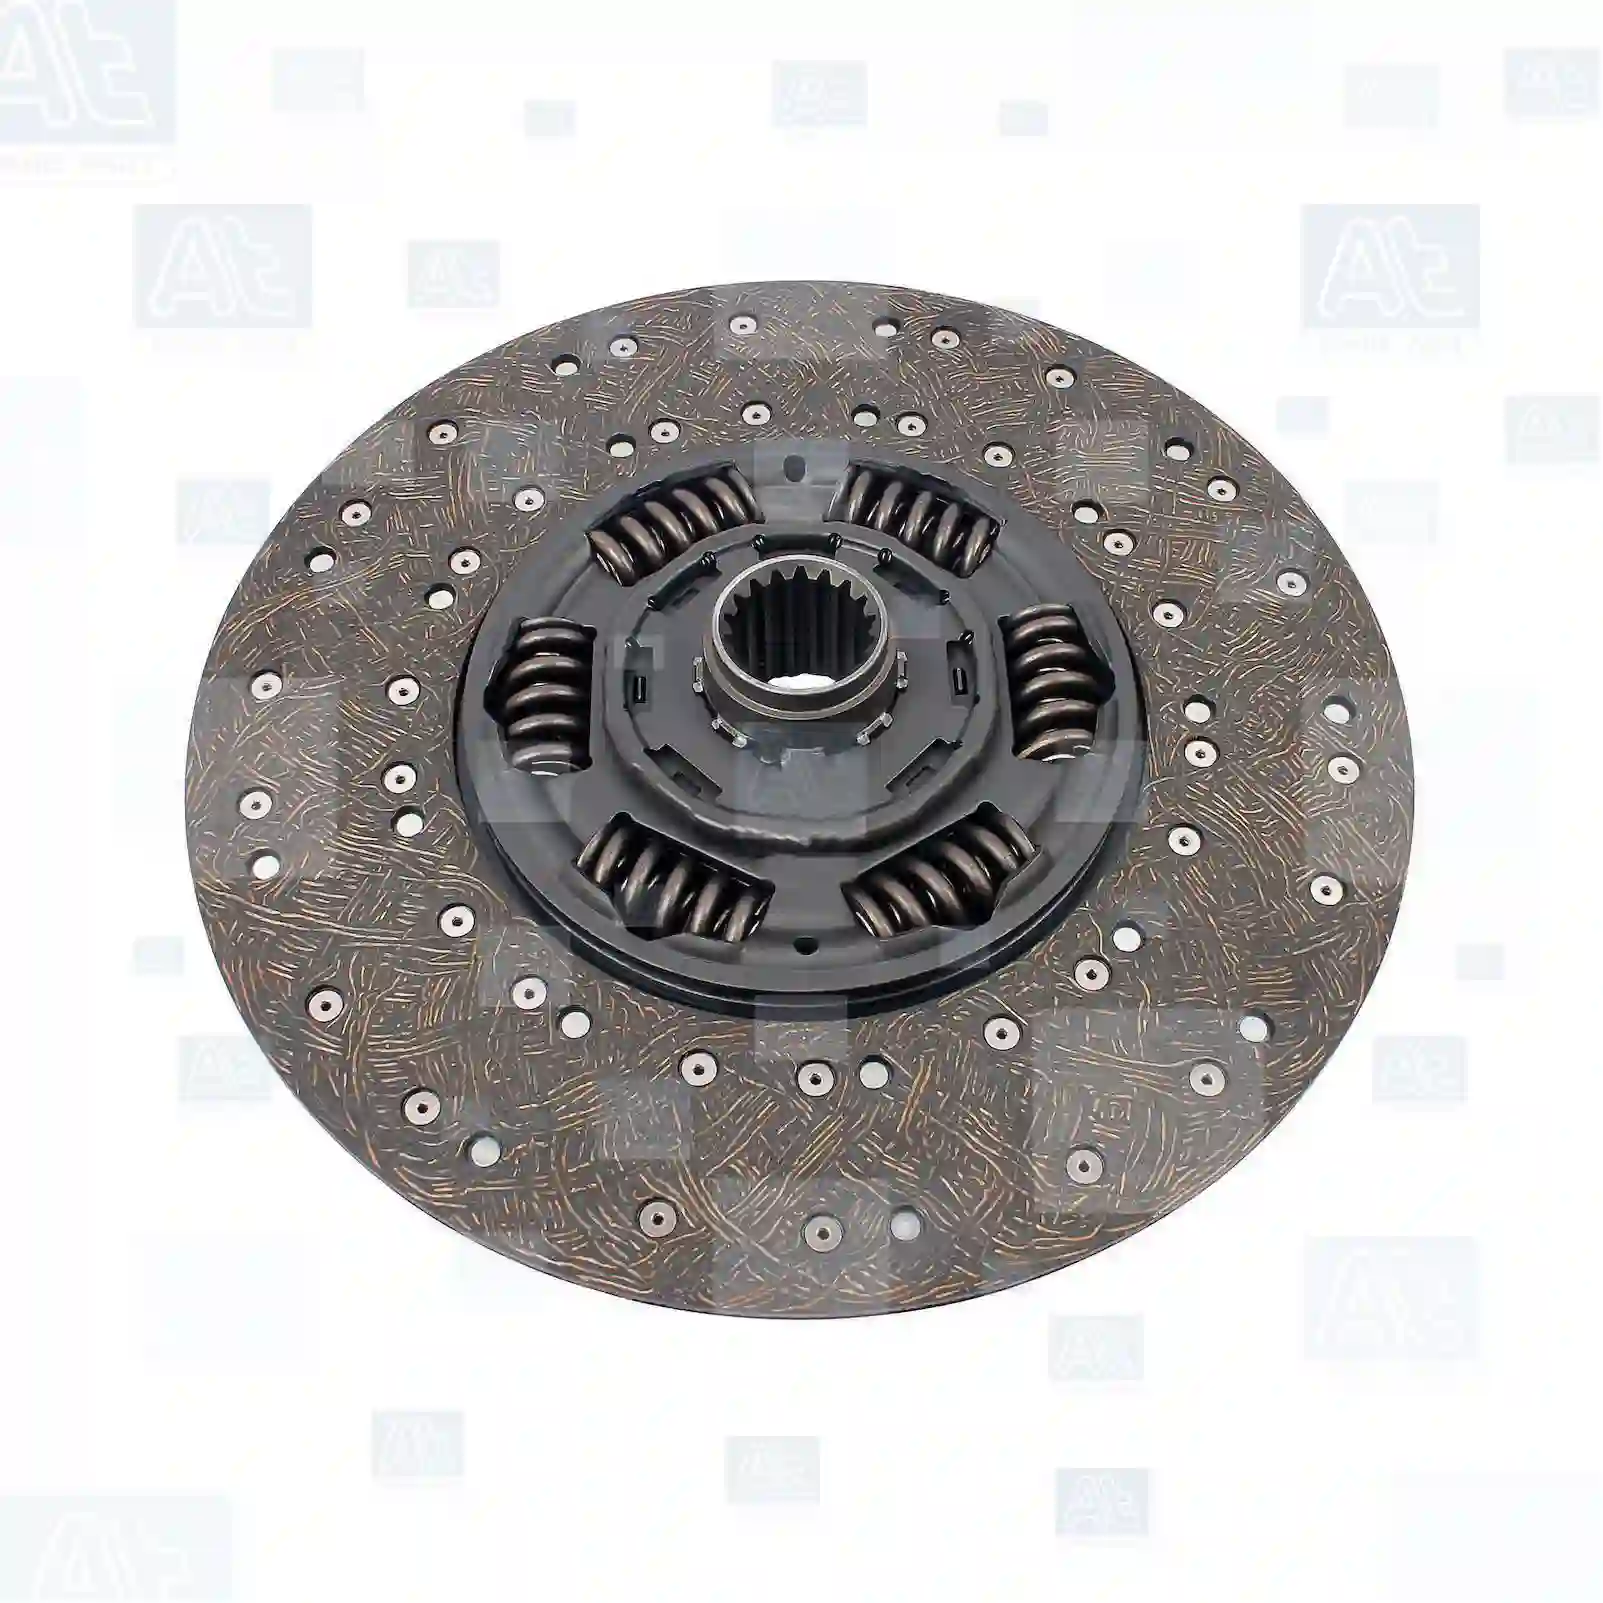 Clutch disc, at no 77722512, oem no: 0002504403, 0002504603, 0152507103, 015250710380, 0152507203, 0152507303, 0152507503, 0152507603, 015250760380, 0152507703, 0182502203, 018250220380, 0182502303, 018250230380, 0182502403, 0182502503, 018250250380, 0182507103, 0192503003, 0192504903, 0192505403, 019250540380, 0192505703, 019250570380, 0192506003, 0192508803, 0202501503, 0202504003, 0202504503, 0202504903, 020250490380, 0202509103, 0202509203, 020250920380, 0212501303, 0212503003, 0212504903, 0212506303, 0212507703, 0212507903, 0212508603, 0212509403, 0232500603, 0252504103, 0252504203, 0252504303, 0252505003, 0252507703, 0262500903, 0262501003, 0262501303, 0262501403, 0262505701, 0262505901, 0272500901, 0272501001, 0282503401, 0282503501 At Spare Part | Engine, Accelerator Pedal, Camshaft, Connecting Rod, Crankcase, Crankshaft, Cylinder Head, Engine Suspension Mountings, Exhaust Manifold, Exhaust Gas Recirculation, Filter Kits, Flywheel Housing, General Overhaul Kits, Engine, Intake Manifold, Oil Cleaner, Oil Cooler, Oil Filter, Oil Pump, Oil Sump, Piston & Liner, Sensor & Switch, Timing Case, Turbocharger, Cooling System, Belt Tensioner, Coolant Filter, Coolant Pipe, Corrosion Prevention Agent, Drive, Expansion Tank, Fan, Intercooler, Monitors & Gauges, Radiator, Thermostat, V-Belt / Timing belt, Water Pump, Fuel System, Electronical Injector Unit, Feed Pump, Fuel Filter, cpl., Fuel Gauge Sender,  Fuel Line, Fuel Pump, Fuel Tank, Injection Line Kit, Injection Pump, Exhaust System, Clutch & Pedal, Gearbox, Propeller Shaft, Axles, Brake System, Hubs & Wheels, Suspension, Leaf Spring, Universal Parts / Accessories, Steering, Electrical System, Cabin Clutch disc, at no 77722512, oem no: 0002504403, 0002504603, 0152507103, 015250710380, 0152507203, 0152507303, 0152507503, 0152507603, 015250760380, 0152507703, 0182502203, 018250220380, 0182502303, 018250230380, 0182502403, 0182502503, 018250250380, 0182507103, 0192503003, 0192504903, 0192505403, 019250540380, 0192505703, 019250570380, 0192506003, 0192508803, 0202501503, 0202504003, 0202504503, 0202504903, 020250490380, 0202509103, 0202509203, 020250920380, 0212501303, 0212503003, 0212504903, 0212506303, 0212507703, 0212507903, 0212508603, 0212509403, 0232500603, 0252504103, 0252504203, 0252504303, 0252505003, 0252507703, 0262500903, 0262501003, 0262501303, 0262501403, 0262505701, 0262505901, 0272500901, 0272501001, 0282503401, 0282503501 At Spare Part | Engine, Accelerator Pedal, Camshaft, Connecting Rod, Crankcase, Crankshaft, Cylinder Head, Engine Suspension Mountings, Exhaust Manifold, Exhaust Gas Recirculation, Filter Kits, Flywheel Housing, General Overhaul Kits, Engine, Intake Manifold, Oil Cleaner, Oil Cooler, Oil Filter, Oil Pump, Oil Sump, Piston & Liner, Sensor & Switch, Timing Case, Turbocharger, Cooling System, Belt Tensioner, Coolant Filter, Coolant Pipe, Corrosion Prevention Agent, Drive, Expansion Tank, Fan, Intercooler, Monitors & Gauges, Radiator, Thermostat, V-Belt / Timing belt, Water Pump, Fuel System, Electronical Injector Unit, Feed Pump, Fuel Filter, cpl., Fuel Gauge Sender,  Fuel Line, Fuel Pump, Fuel Tank, Injection Line Kit, Injection Pump, Exhaust System, Clutch & Pedal, Gearbox, Propeller Shaft, Axles, Brake System, Hubs & Wheels, Suspension, Leaf Spring, Universal Parts / Accessories, Steering, Electrical System, Cabin